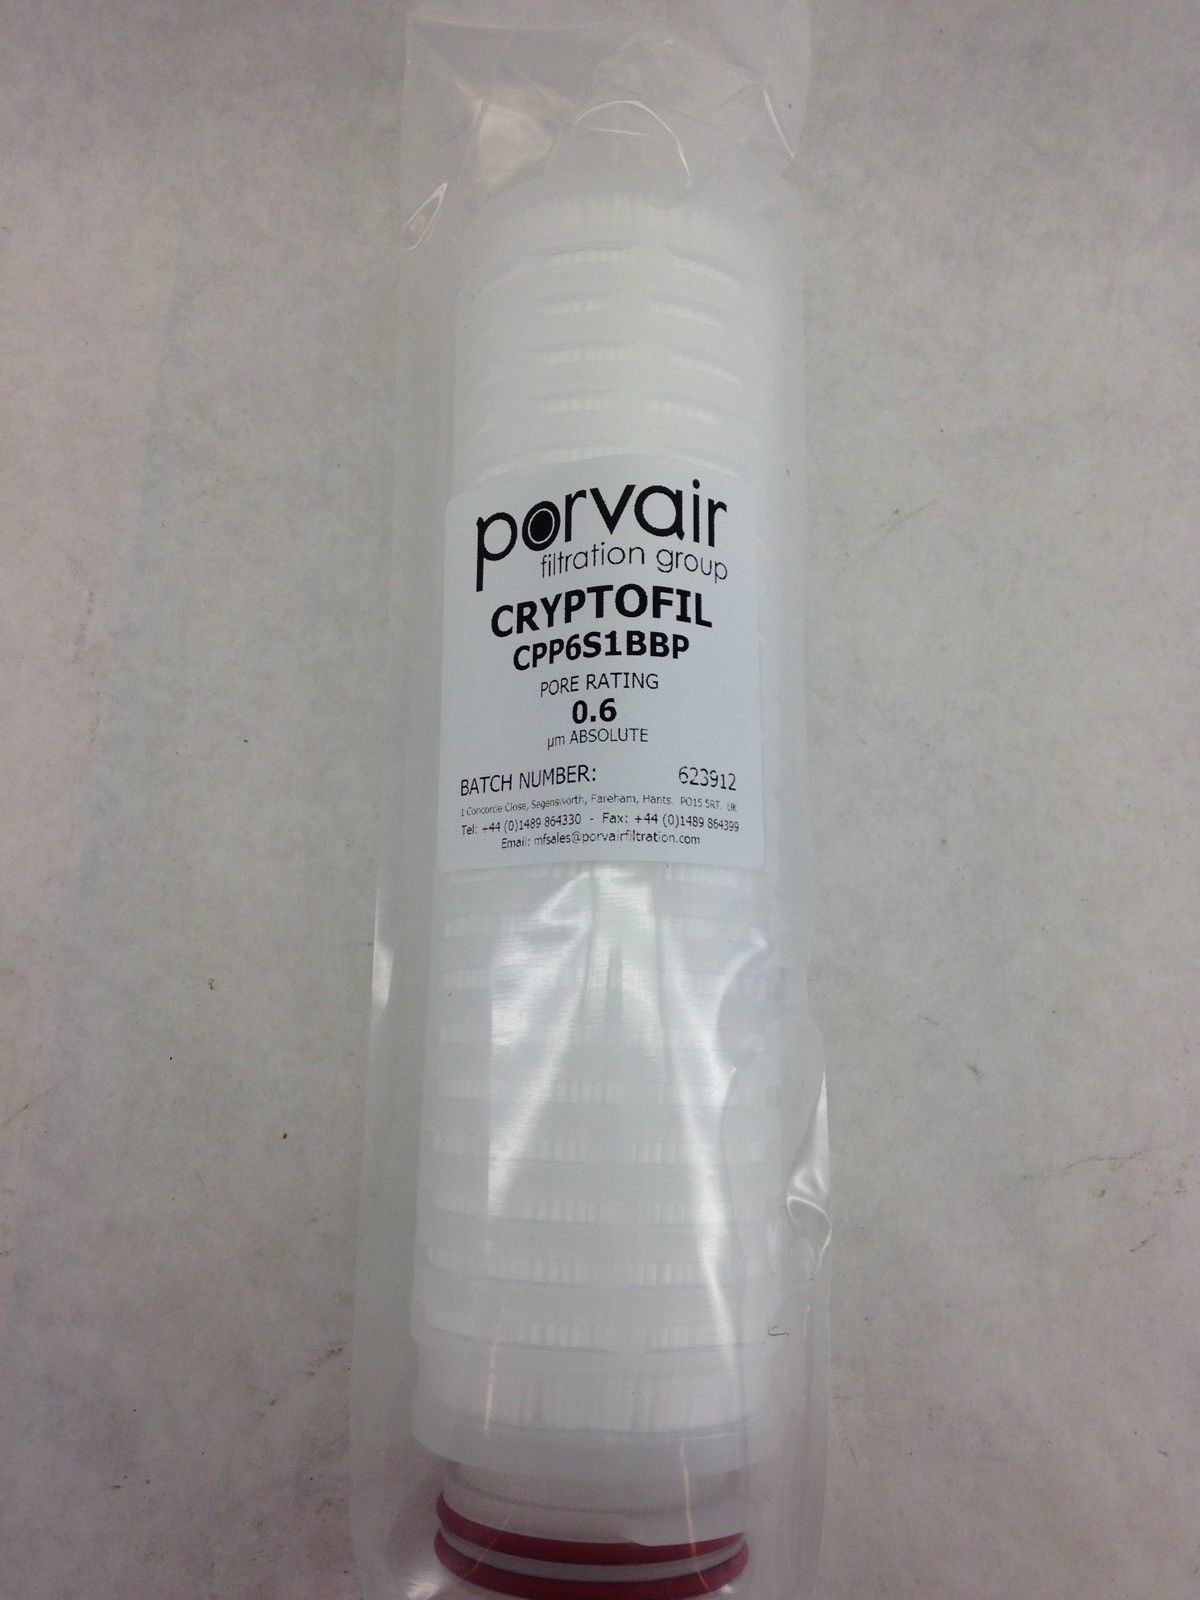 PORVAIR FILTRATION GROUP CRYPTOFIL CPP6S1BBP (B443) 2